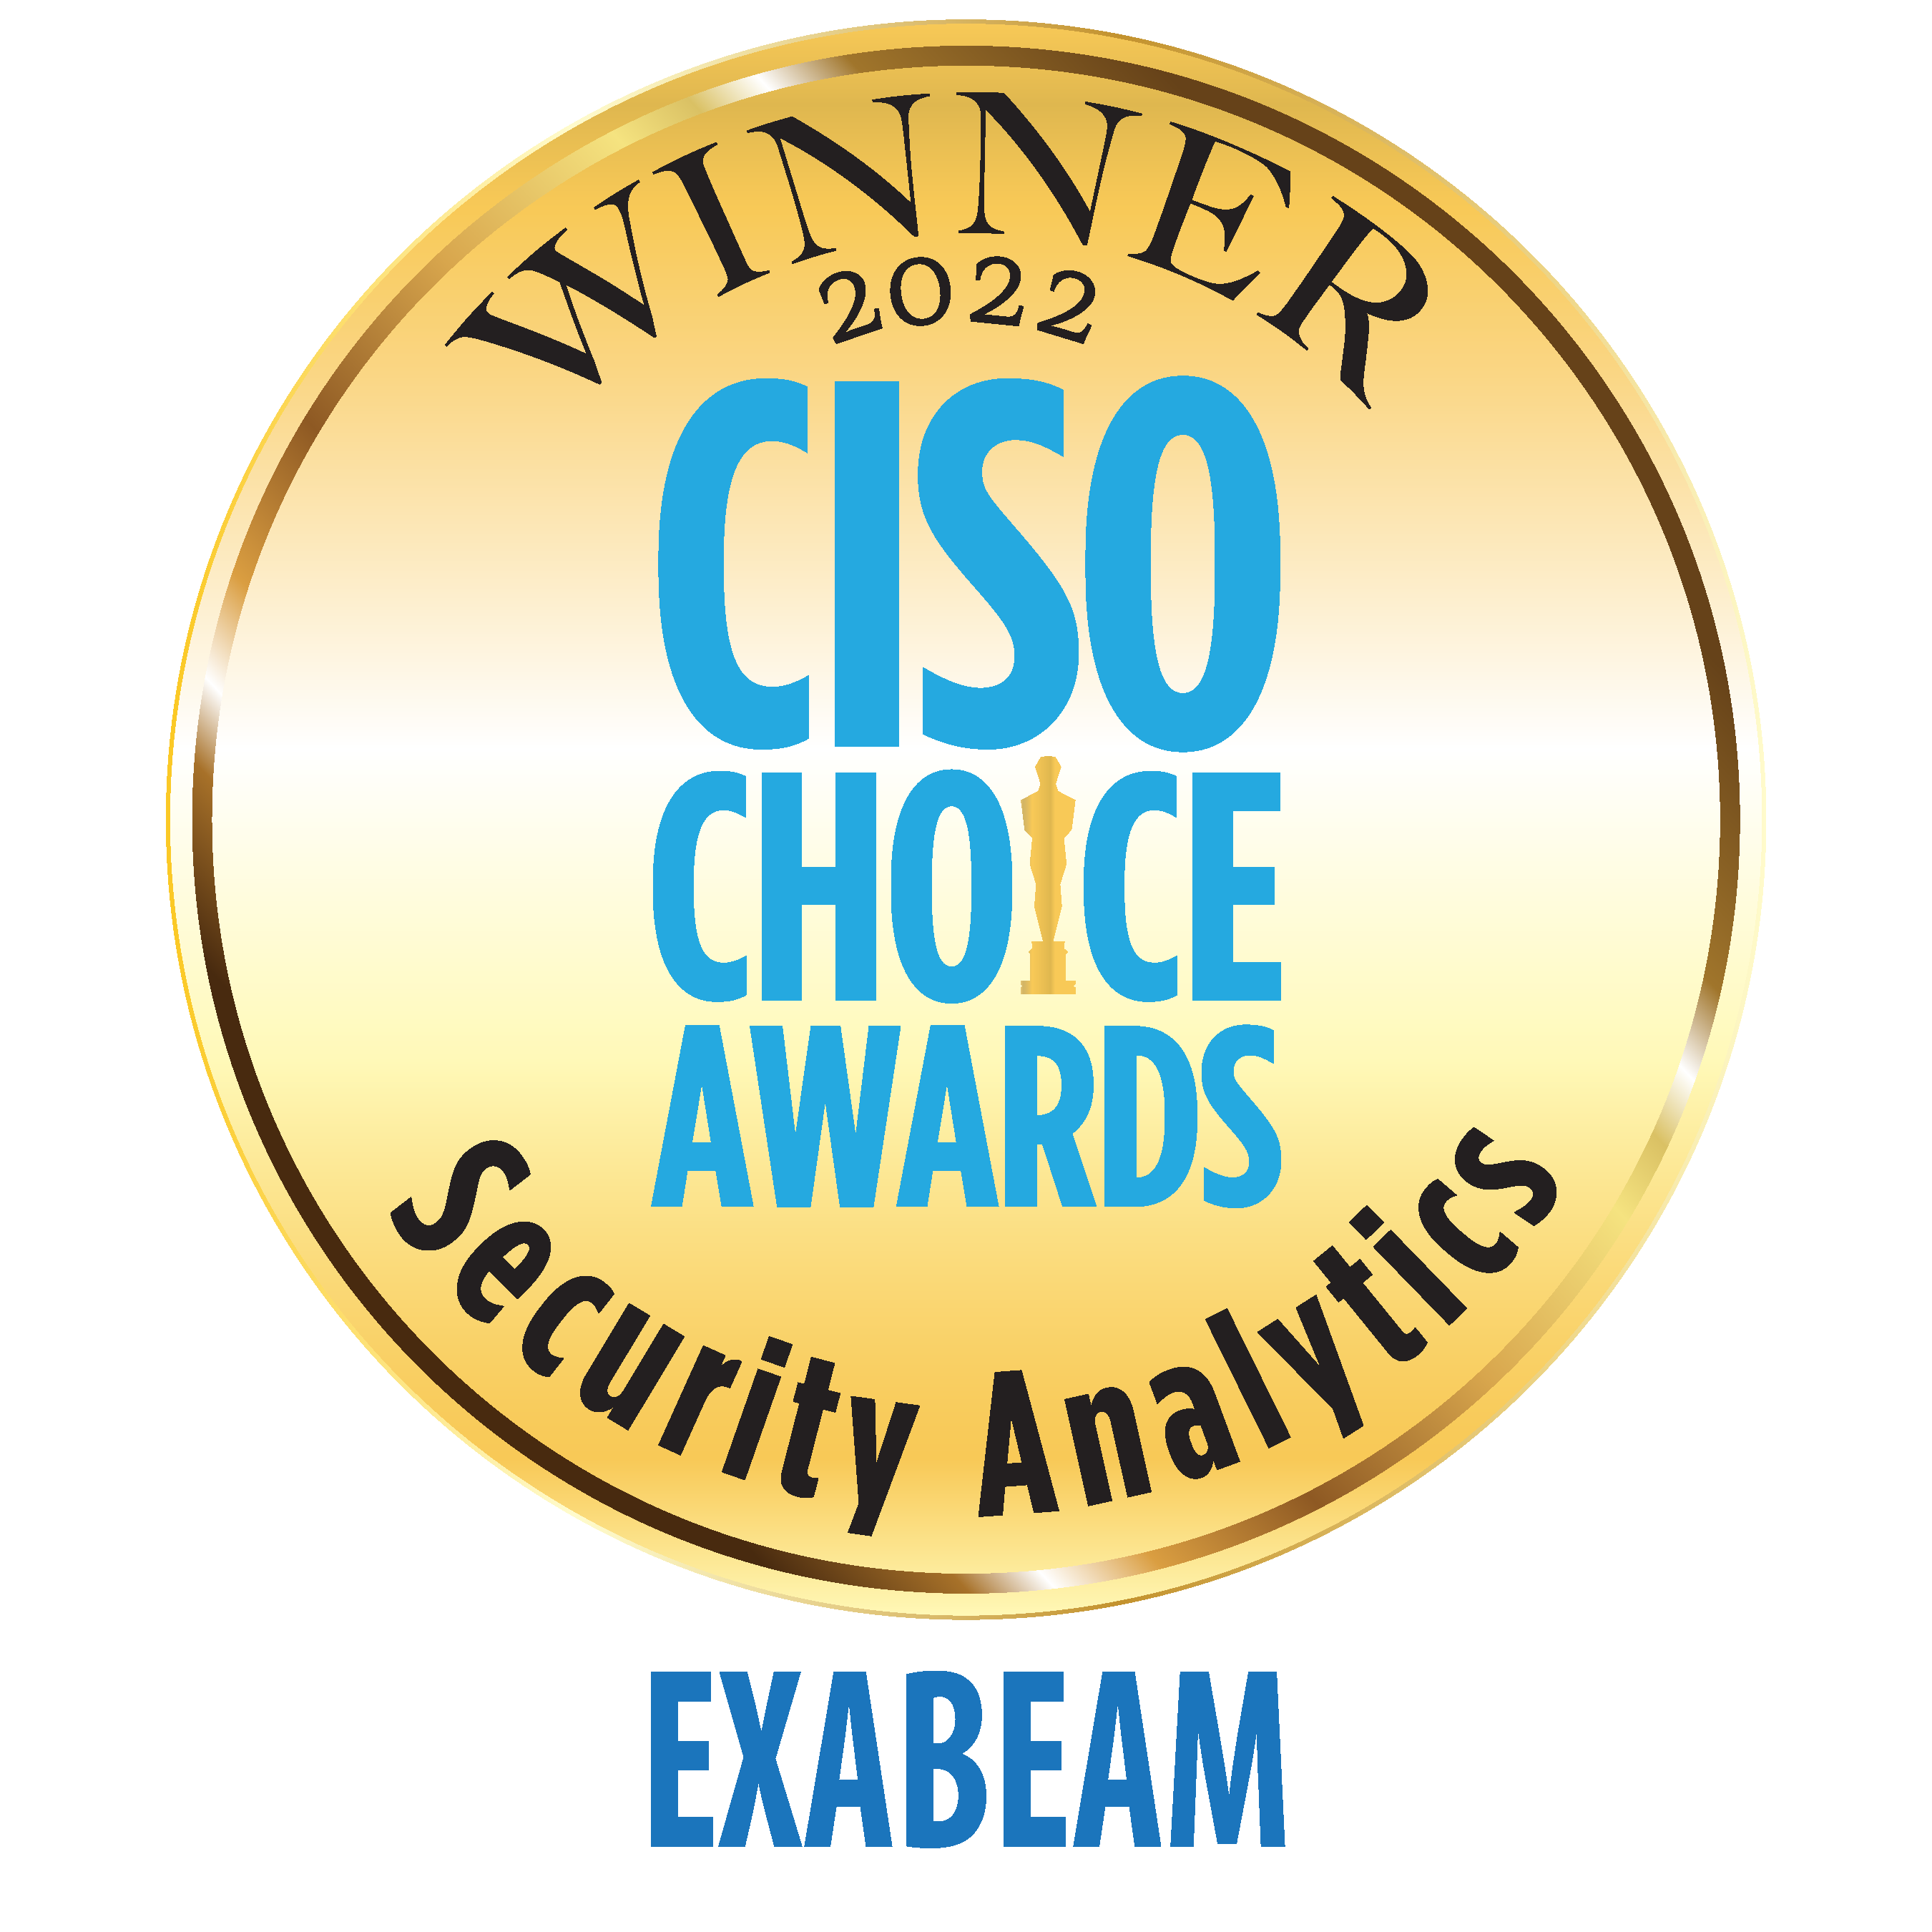 Exabeam Security Analytics CISO Choice Awards 2022 Security Current